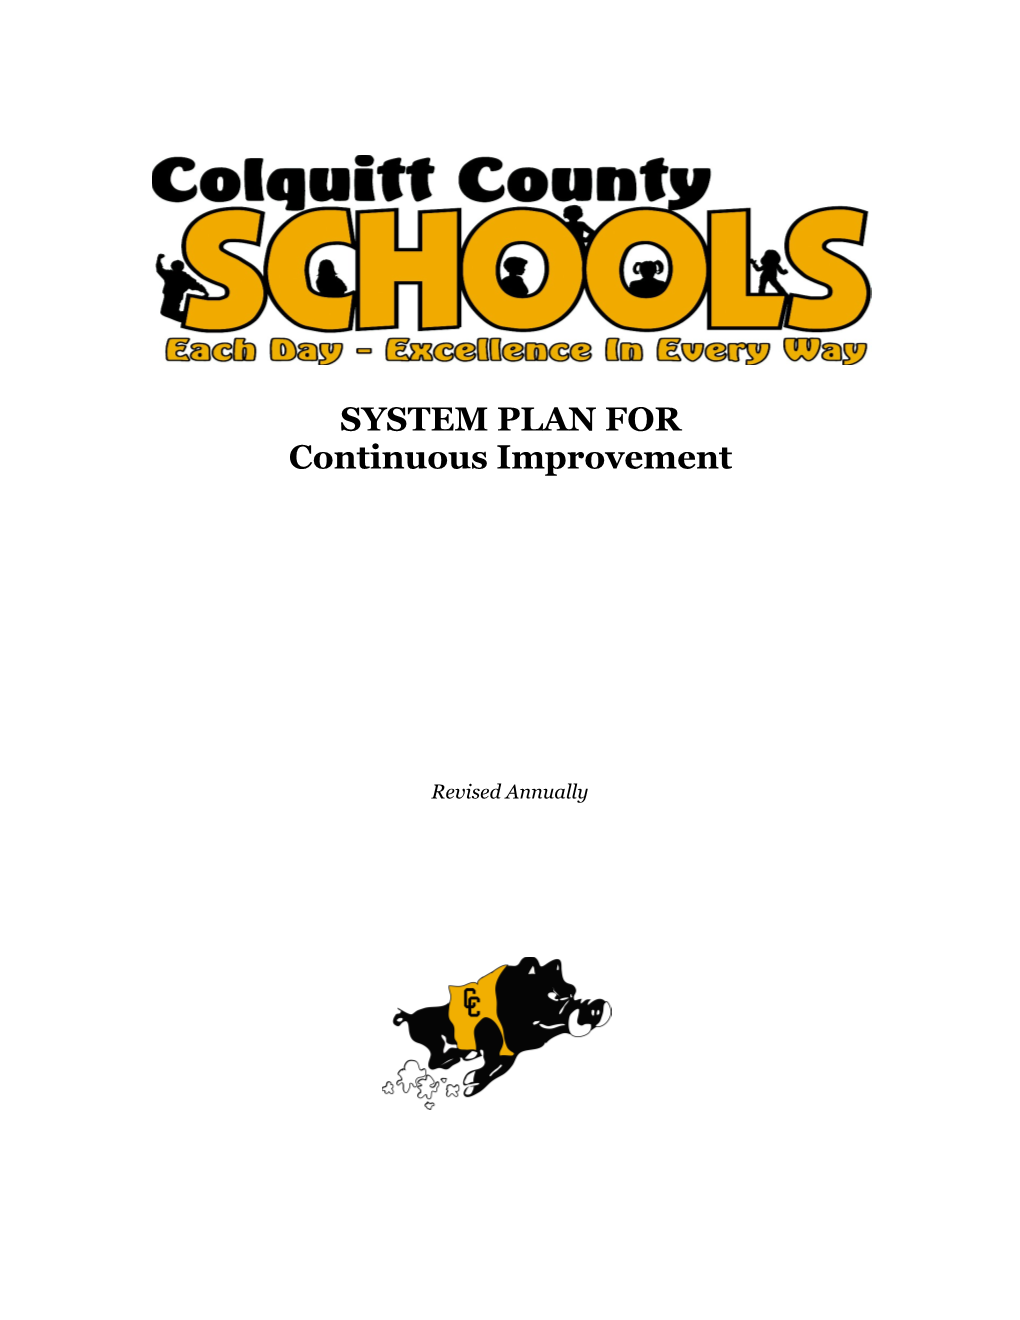 SYSTEM PLAN for Continuous Improvement